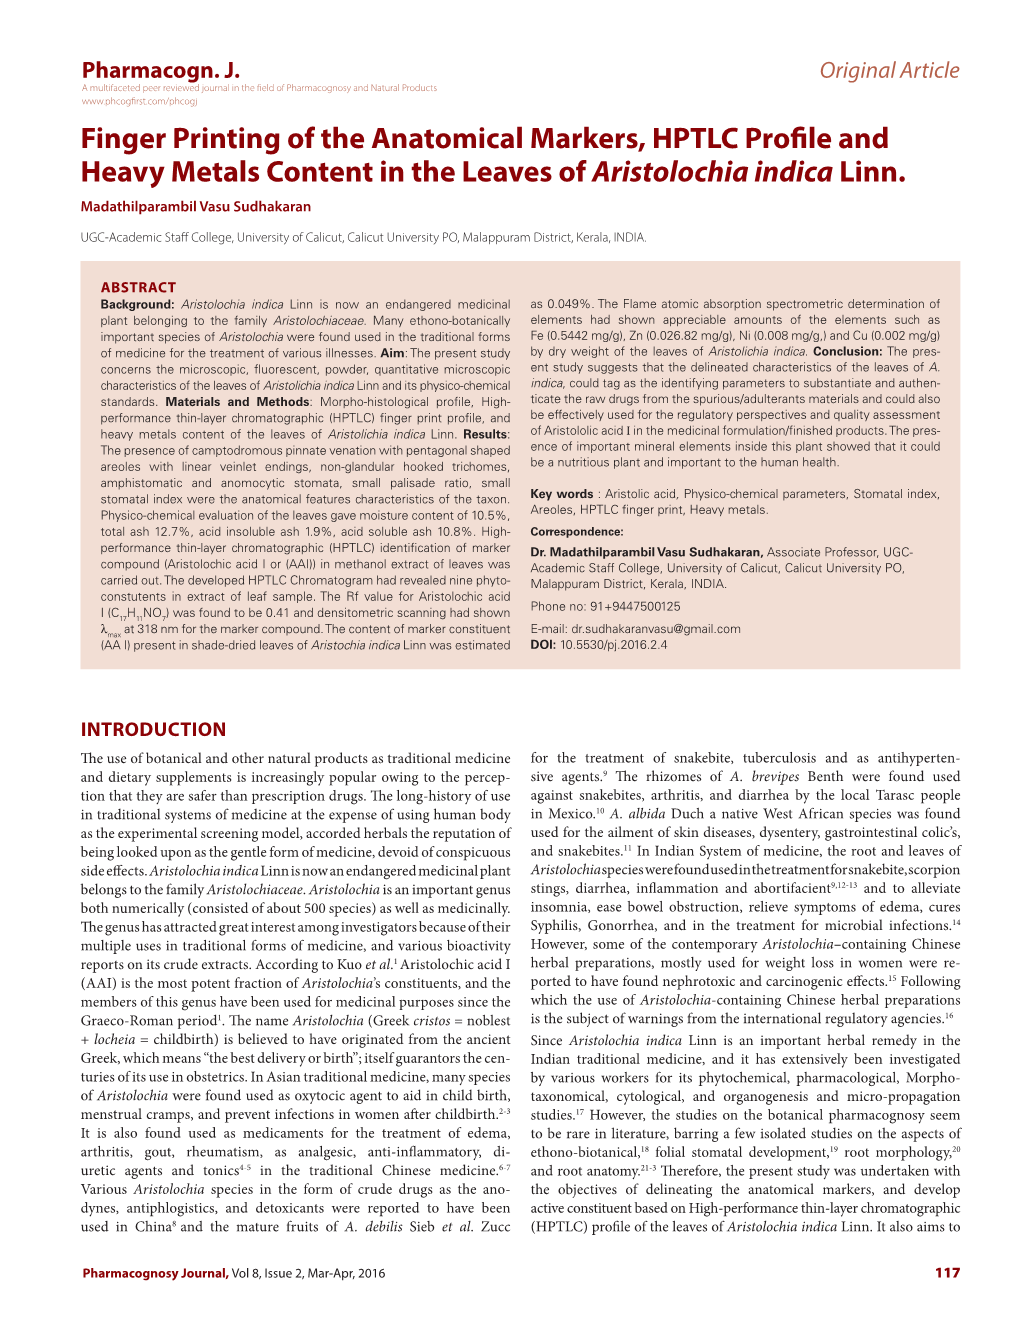 Finger Printing of the Anatomical Markers, HPTLC Profile and Heavy Metals Content in the Leaves of Aristolochia Indica Linn